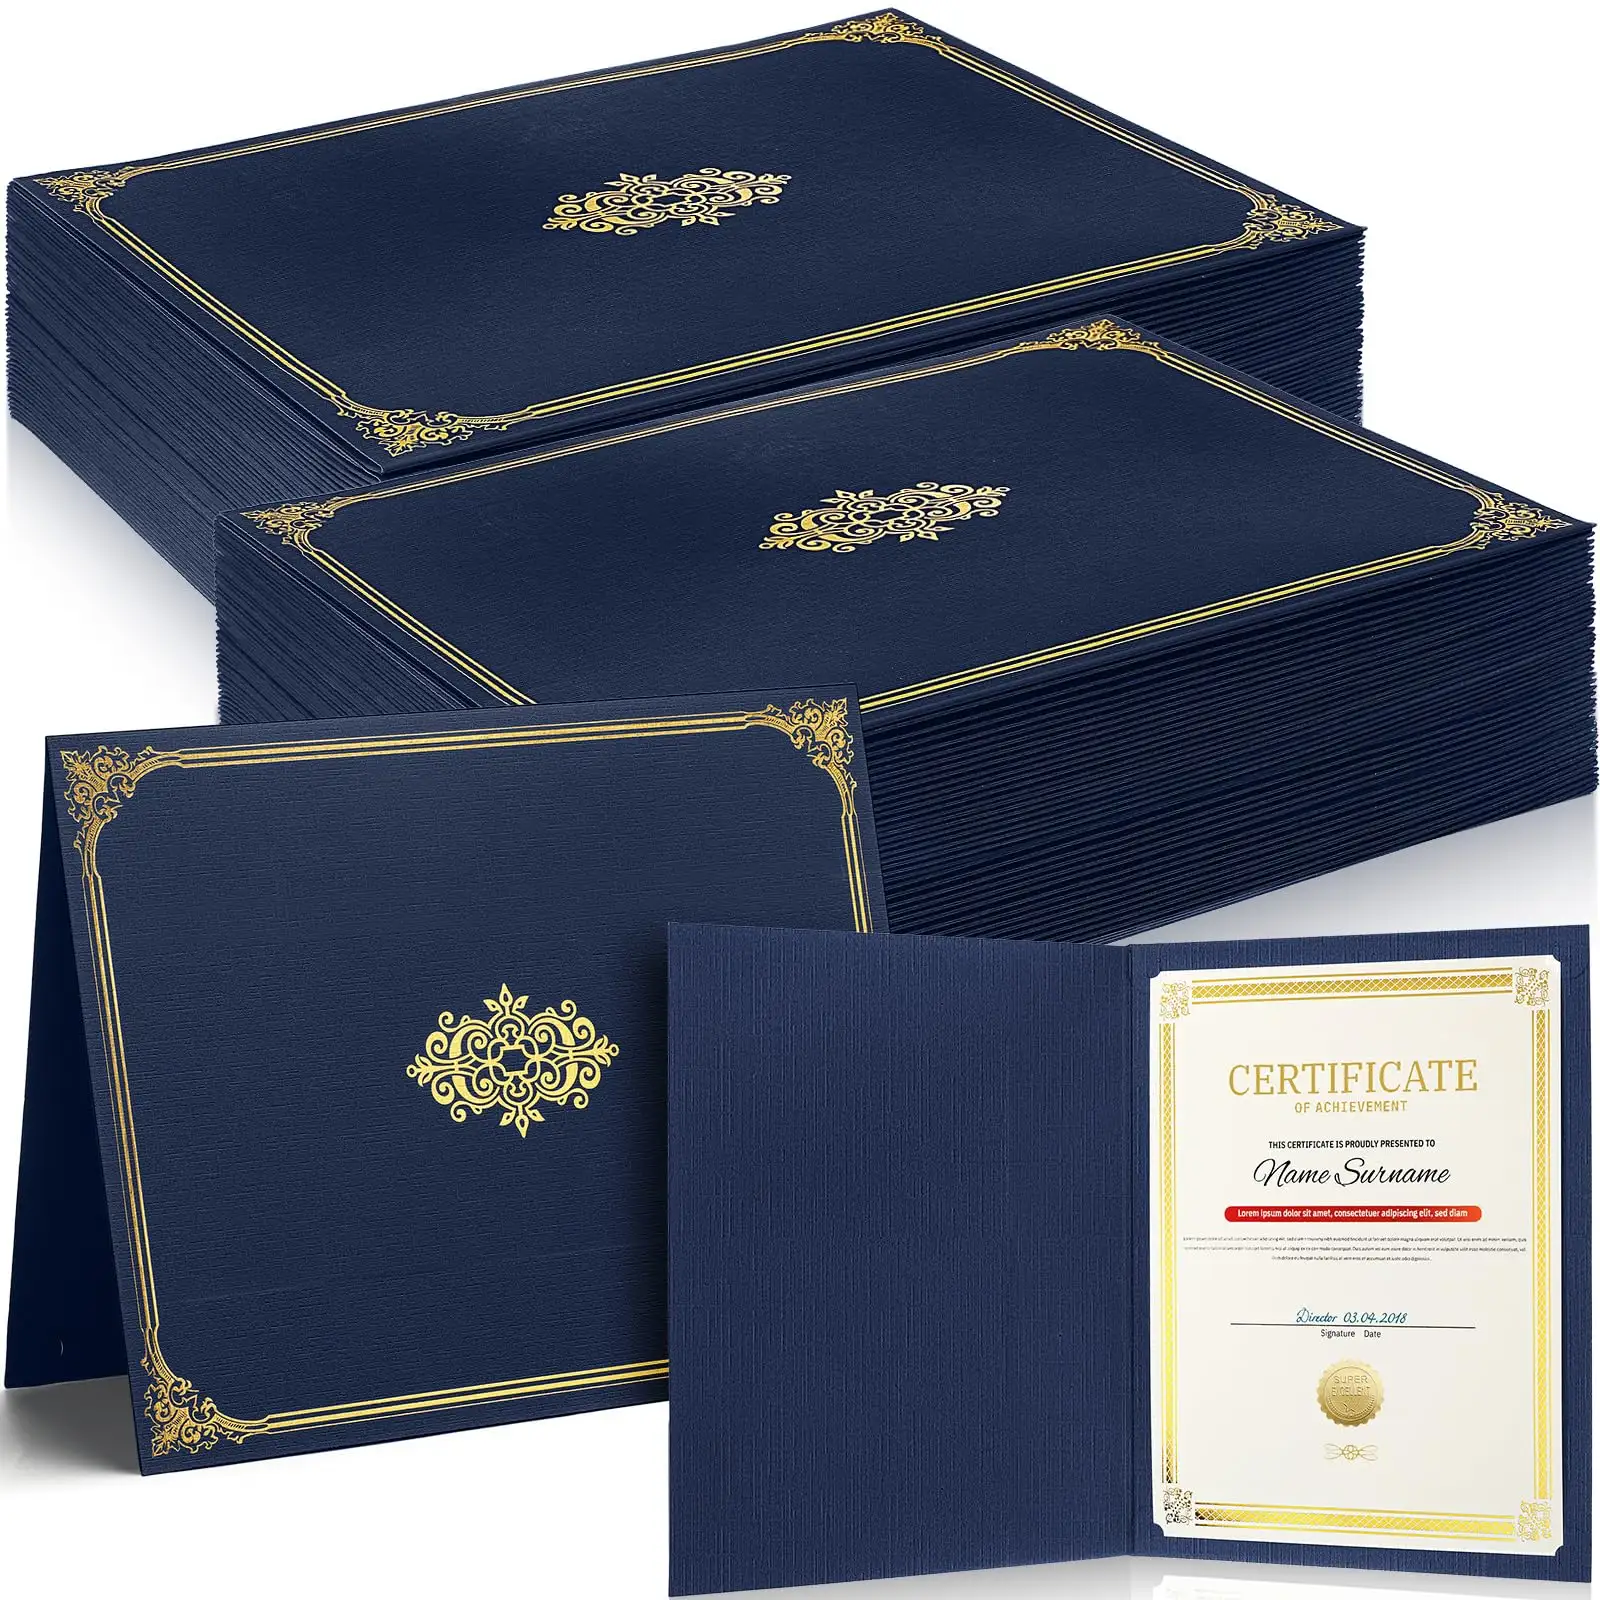 Custom certificate holders for 8.5*11 letters gold foil stamp paper award seals for diploma award accomplishment of graduation